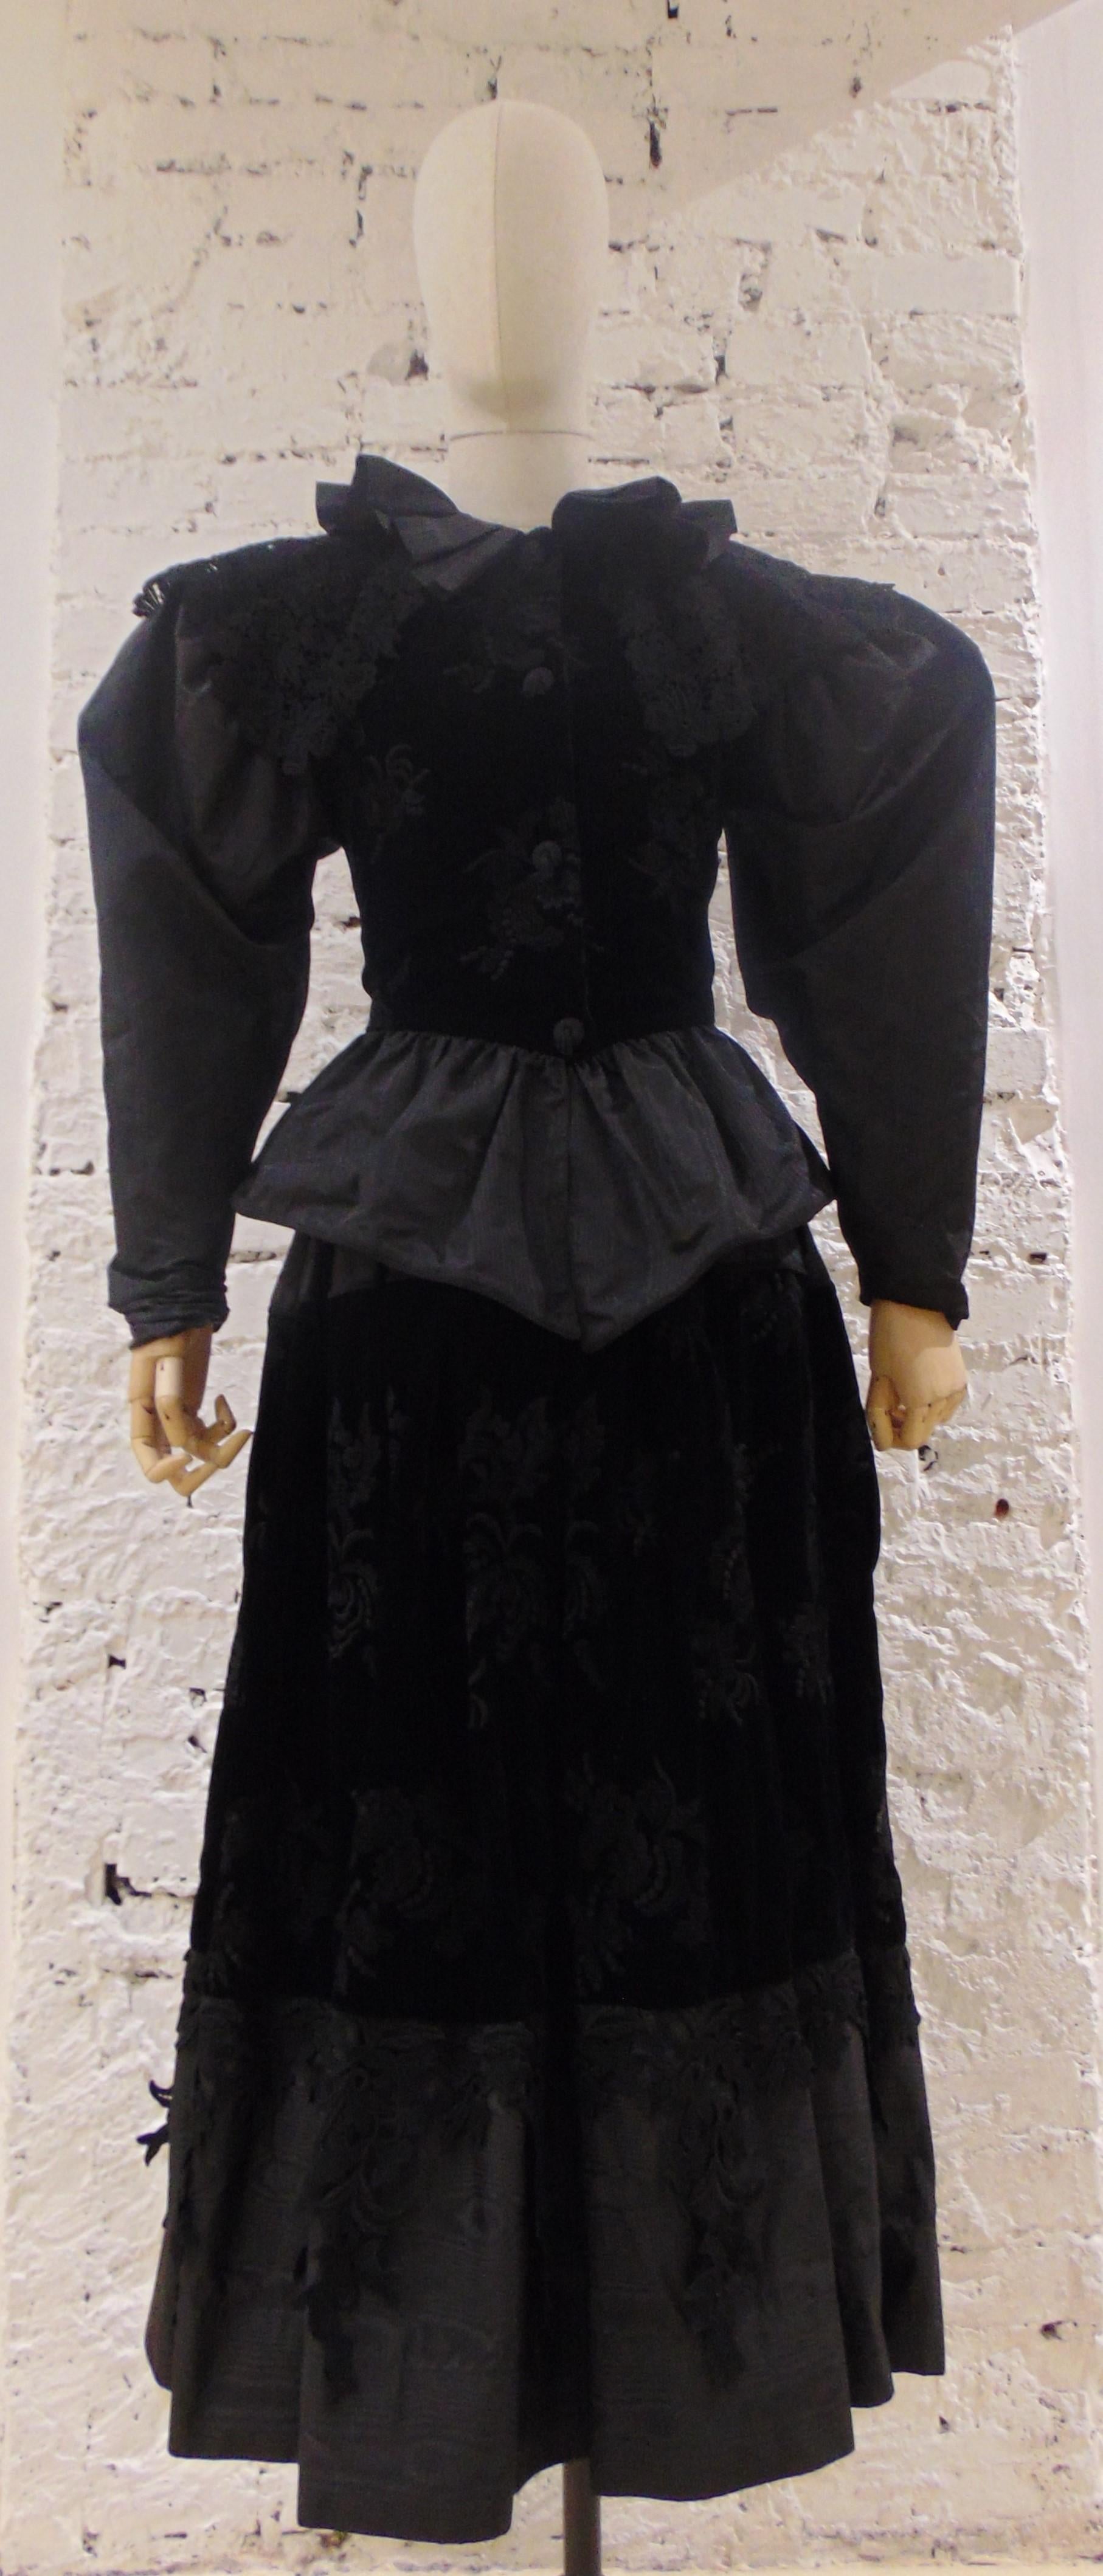 Claude Montana Black Silk Velvet Lace Skirt Suit
This suit, a really piece of art, is made of a jacket embellished with laces and velvet and a long black skirt made with velvet and embroided
totally made in italy in size 42
composition is